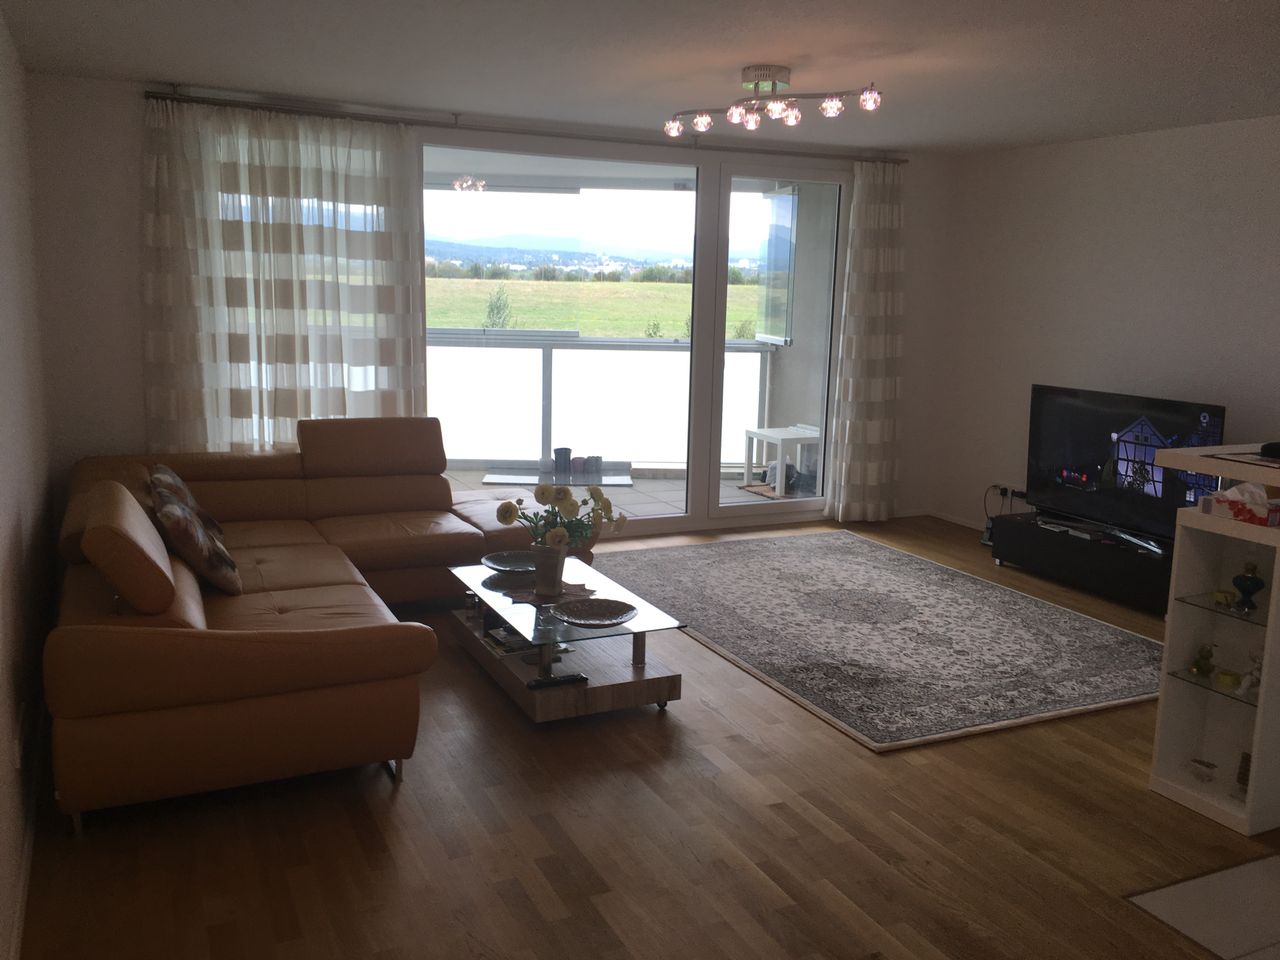 Luxury Furnished 3-Bedroom apartment with guest bathroom and large loggia with Taunus and park views in Frankfurt.